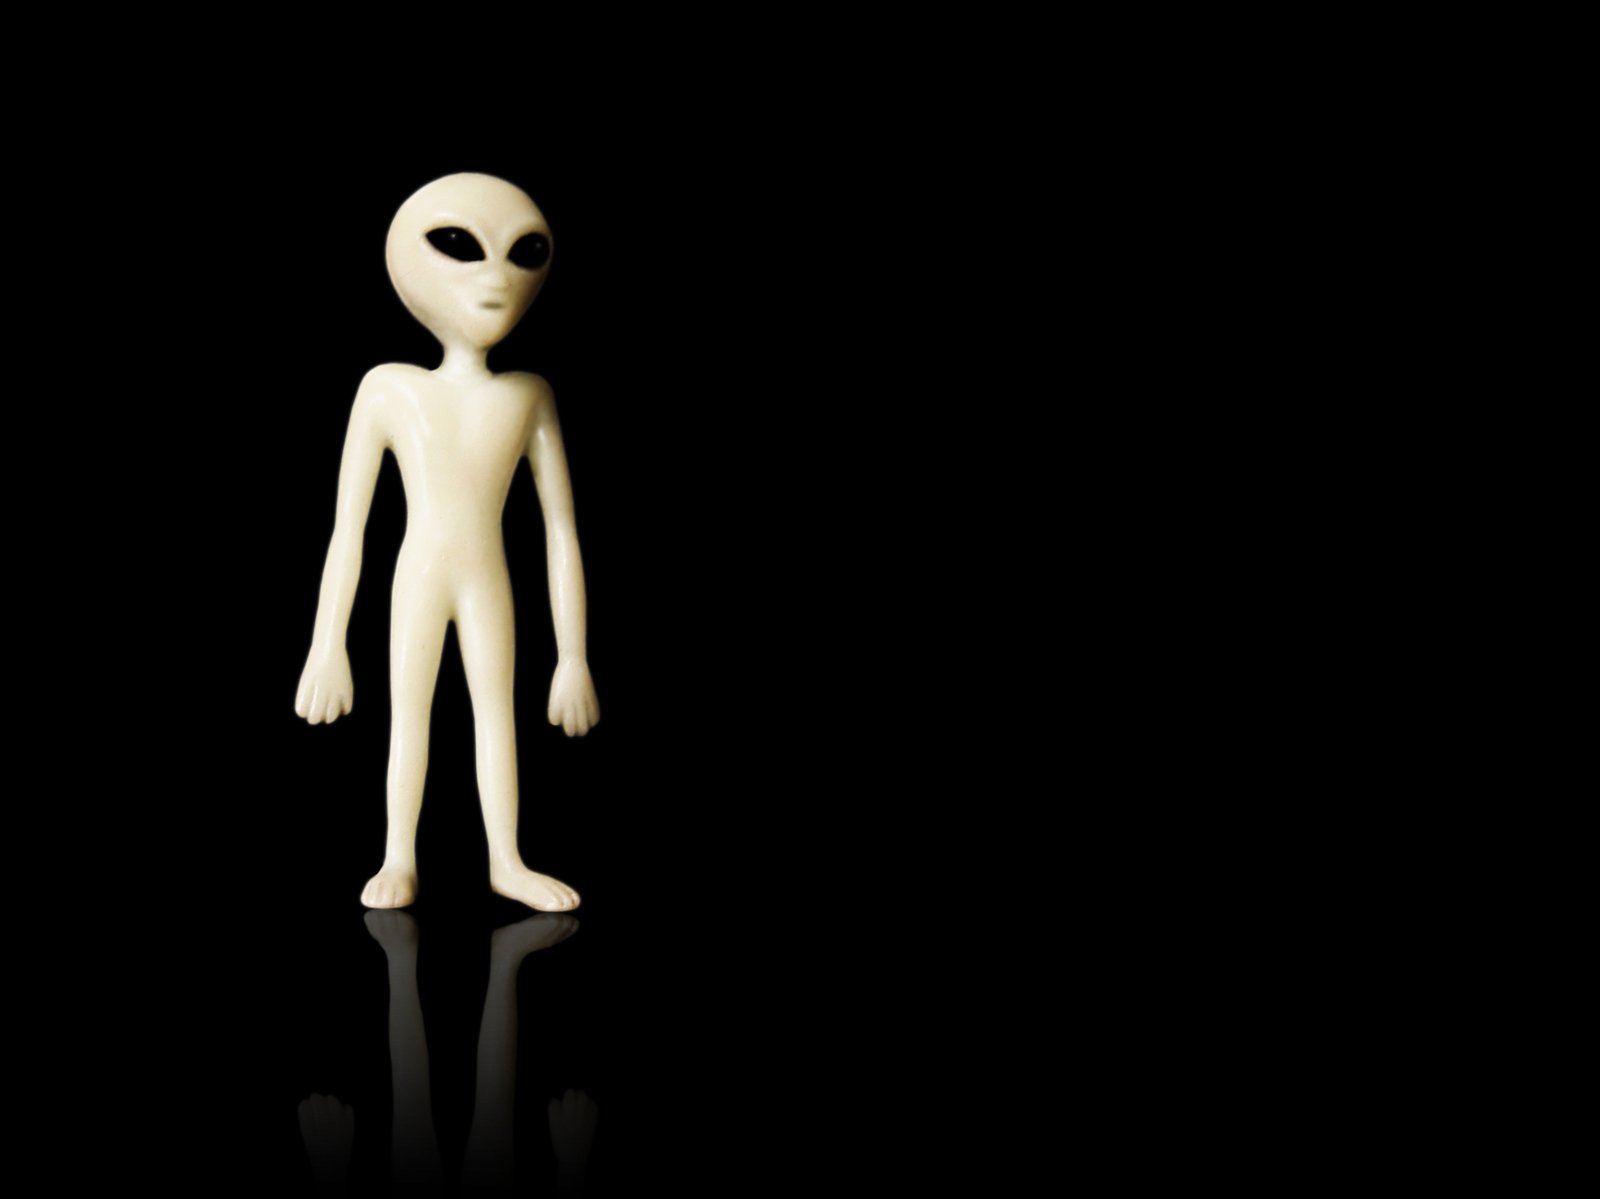 a small alien toy stands on a black surface